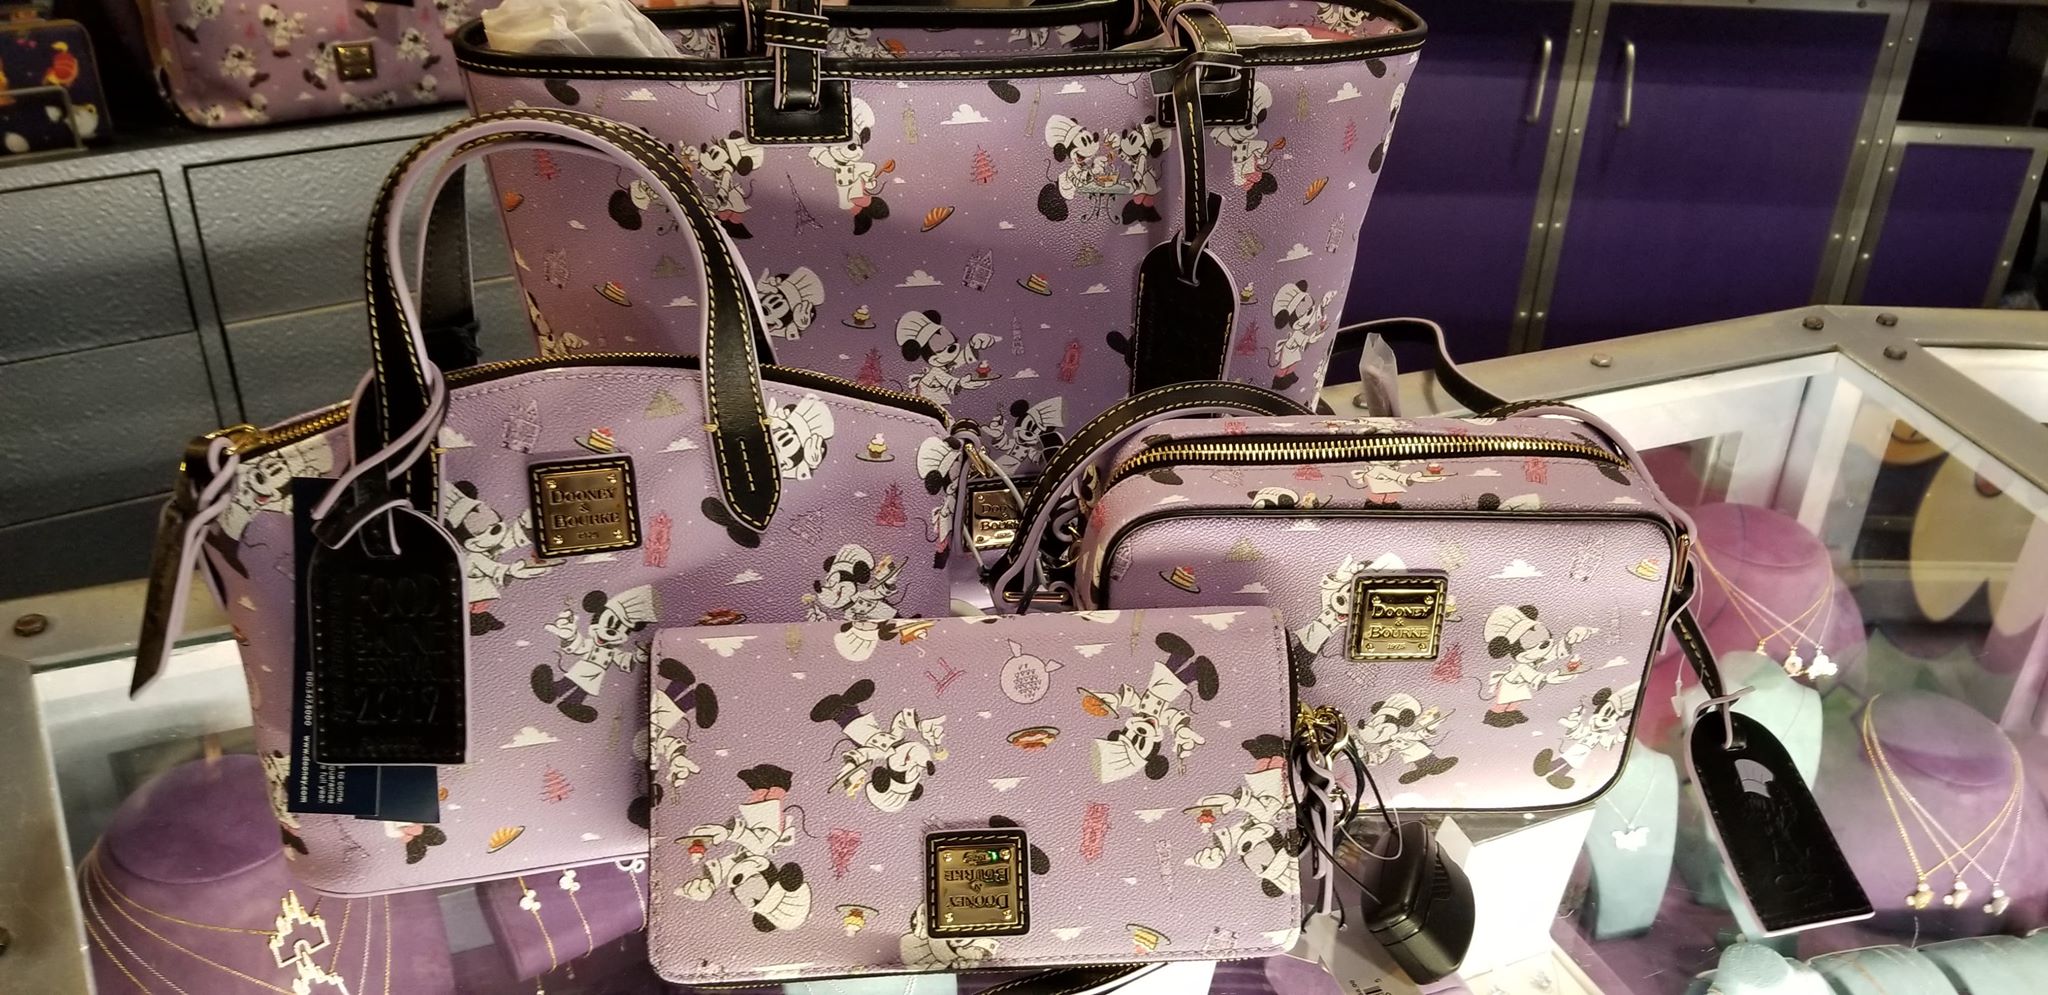 Closer Look At This Year's Food and Wine Dooney & Bourke Collection